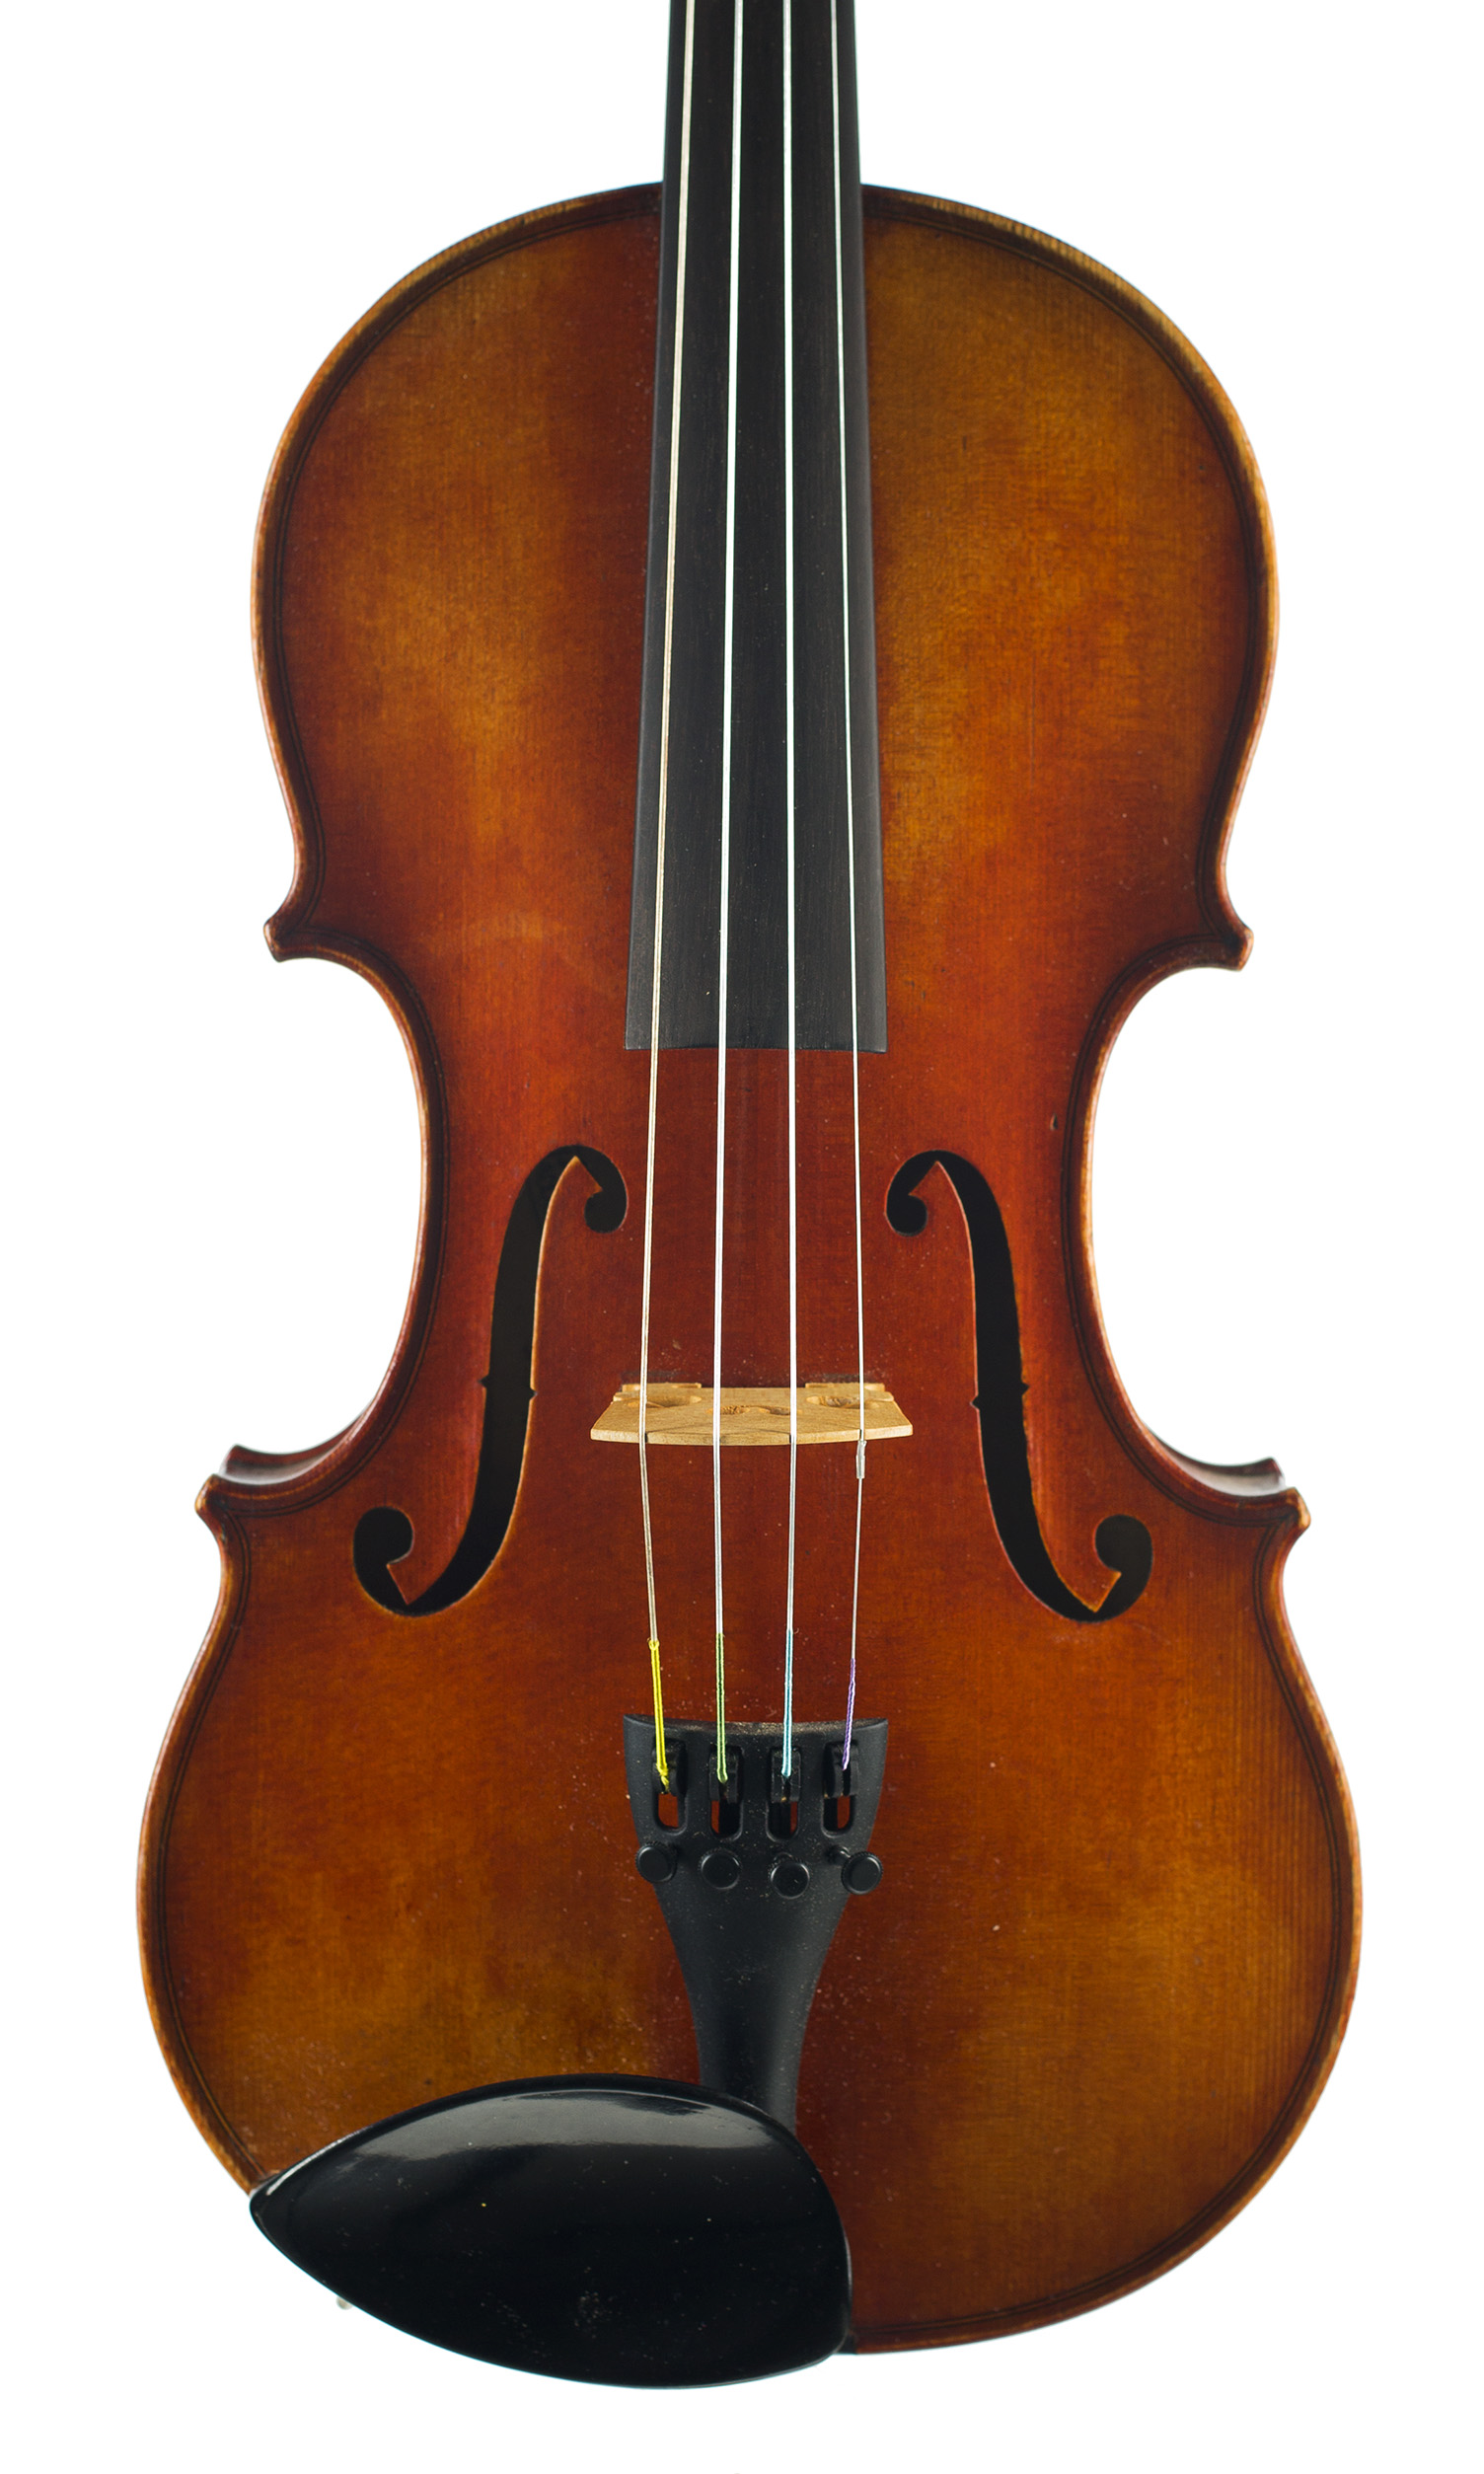 A violin, labelled Charles Bovis Over 100 years old